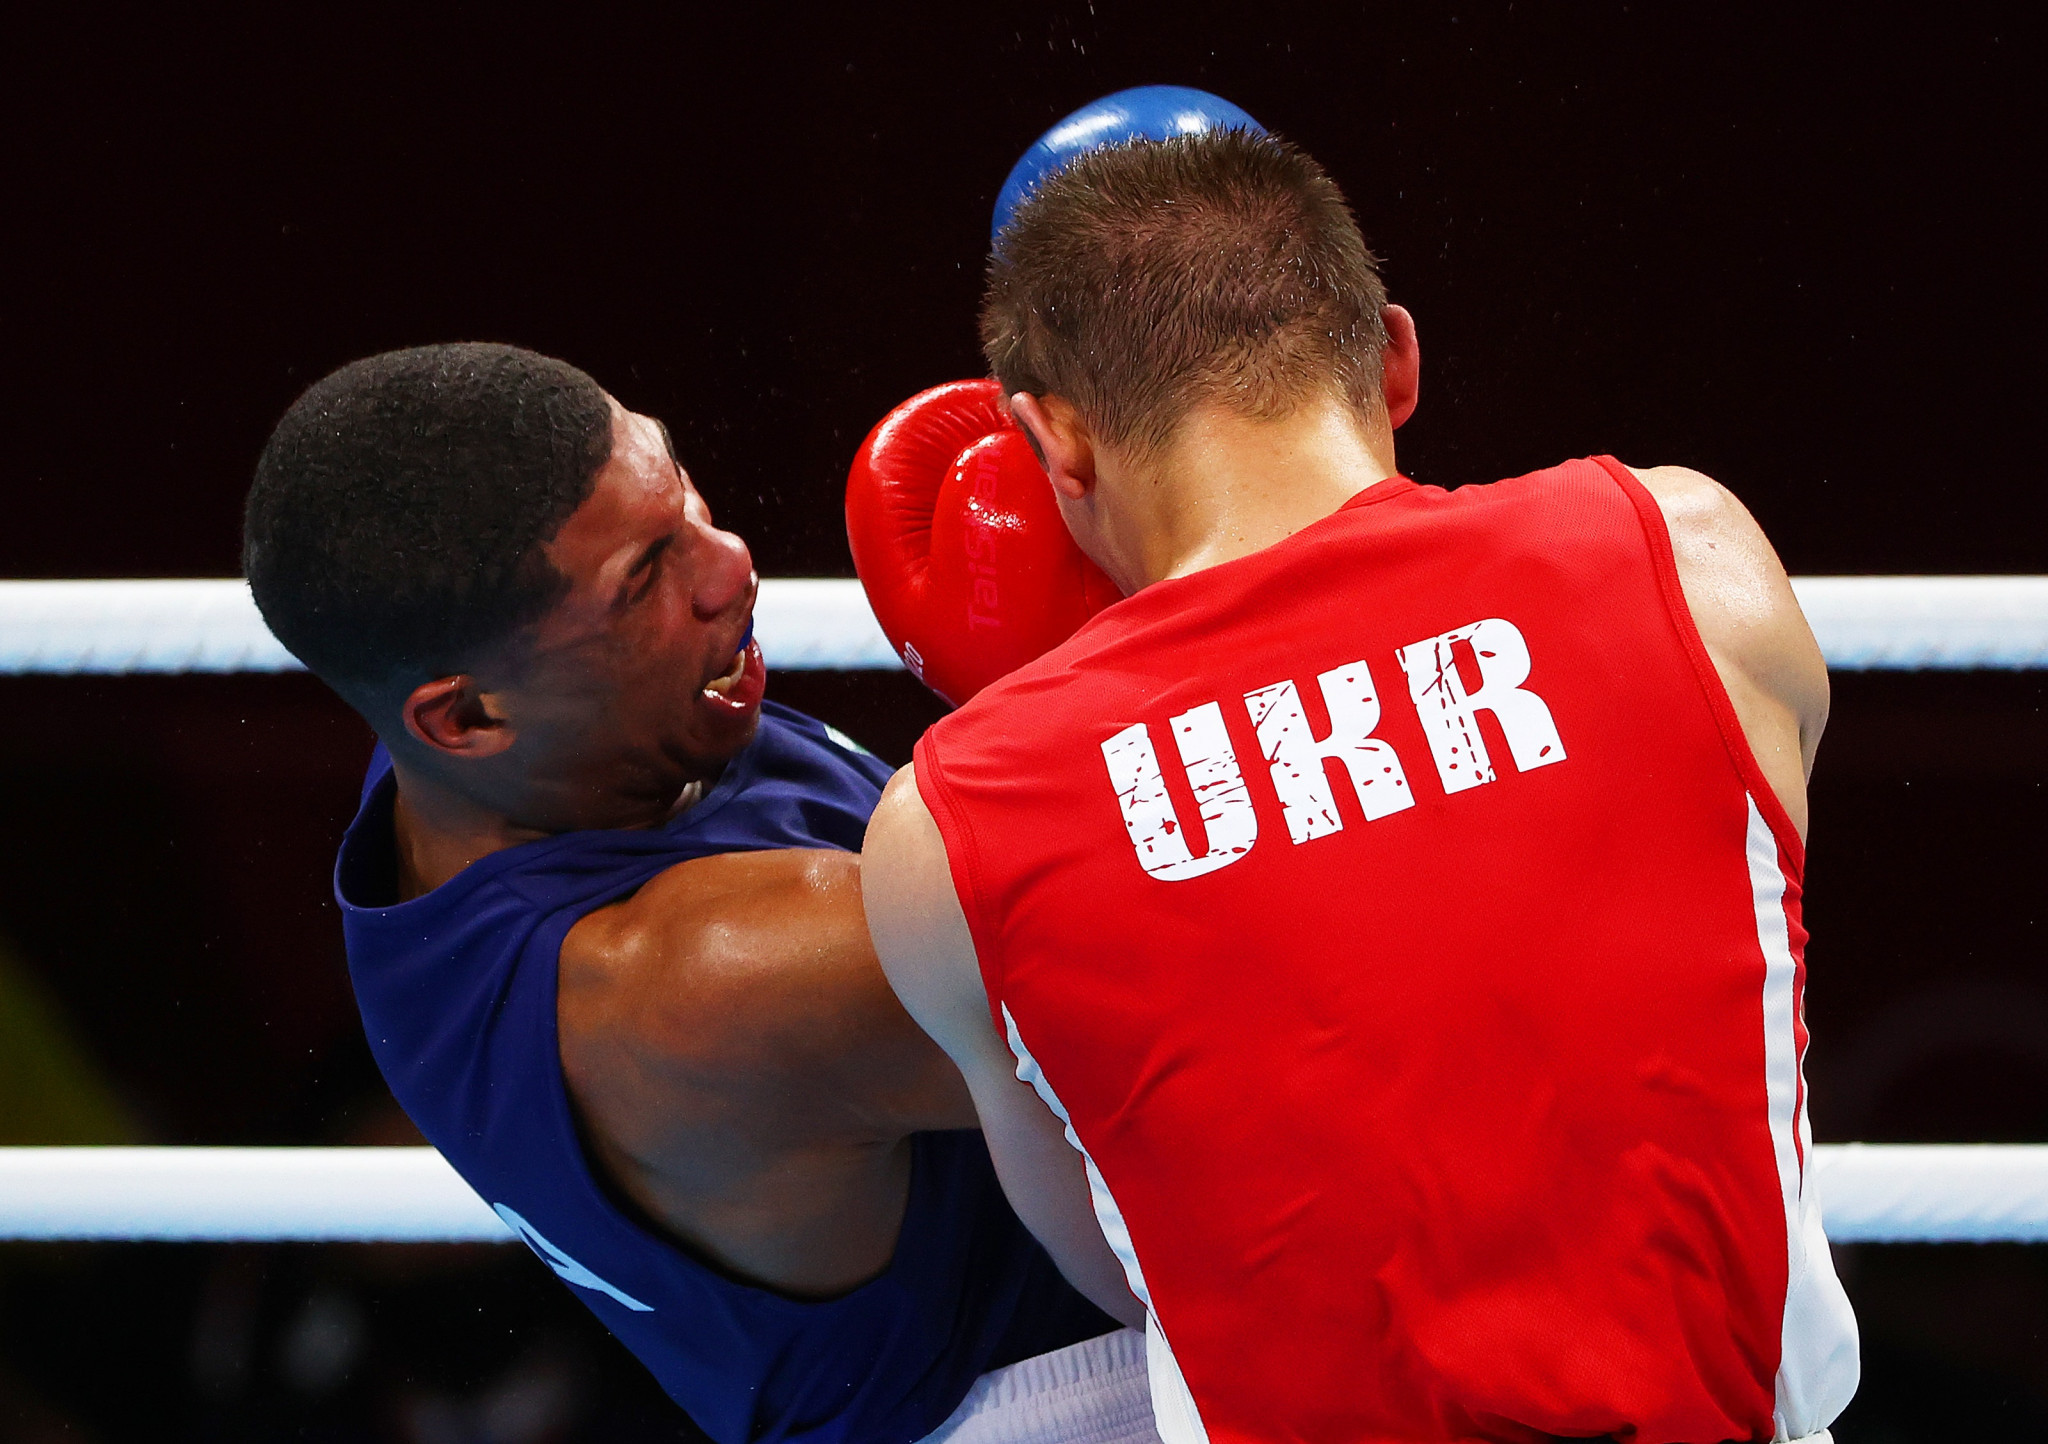 The Boxing Federation of Ukraine claimed that up to 17 countries would be willing to join them in boycotting events where Russian boxers are present ©Getty Images